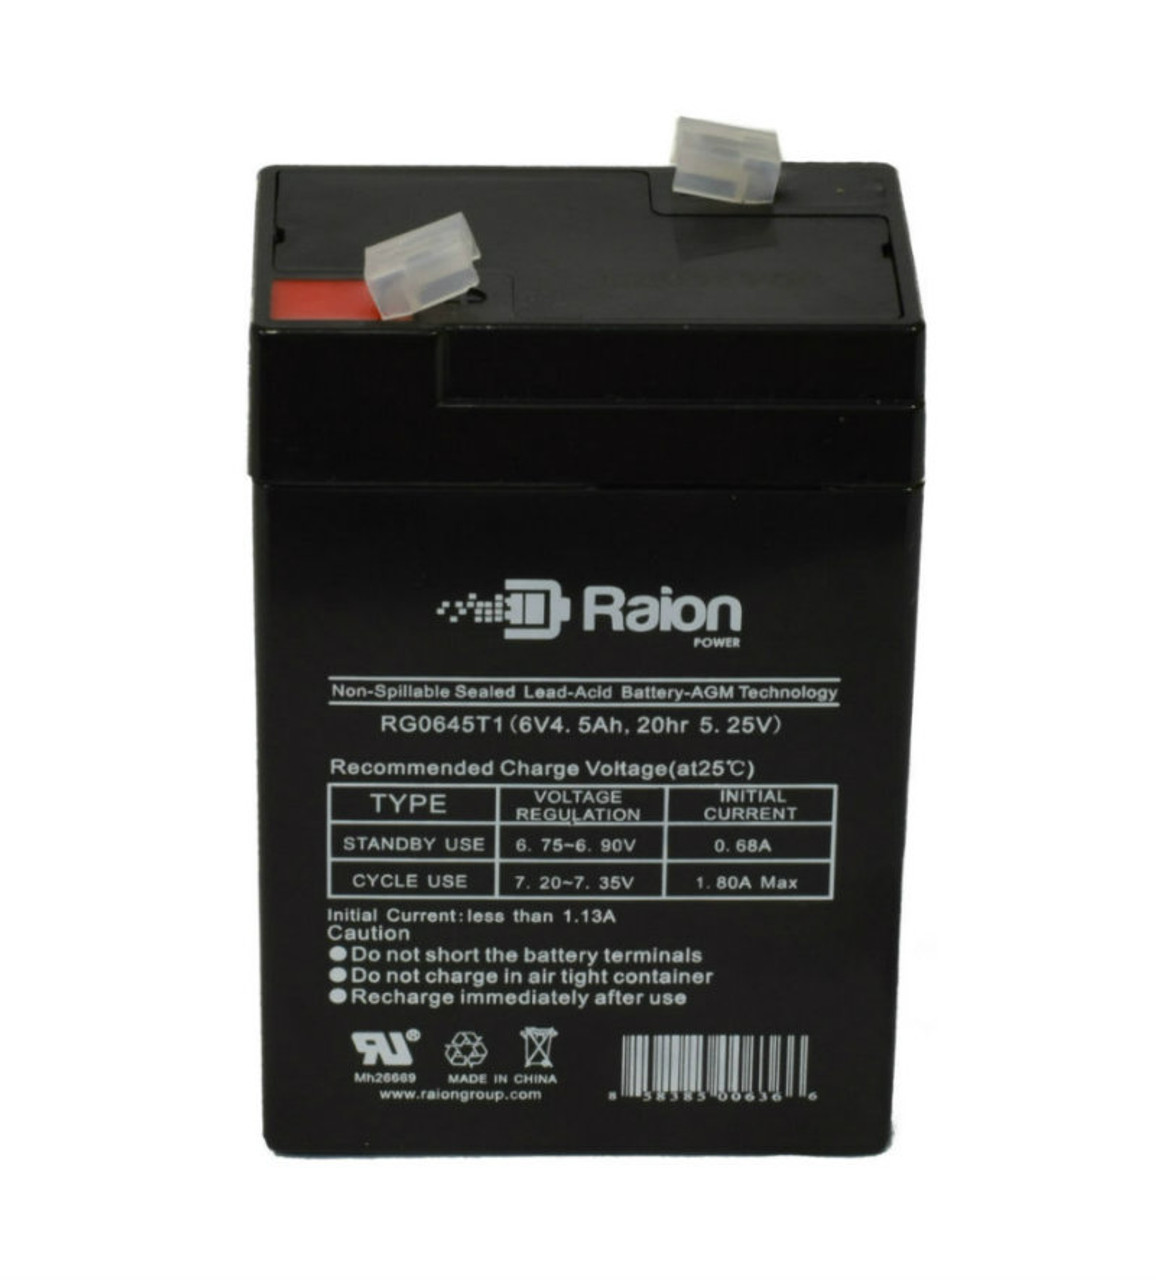 Raion Power RG0645T1 Replacement Battery Cartridge for Gruber Power 58AGEN-6-4-F1